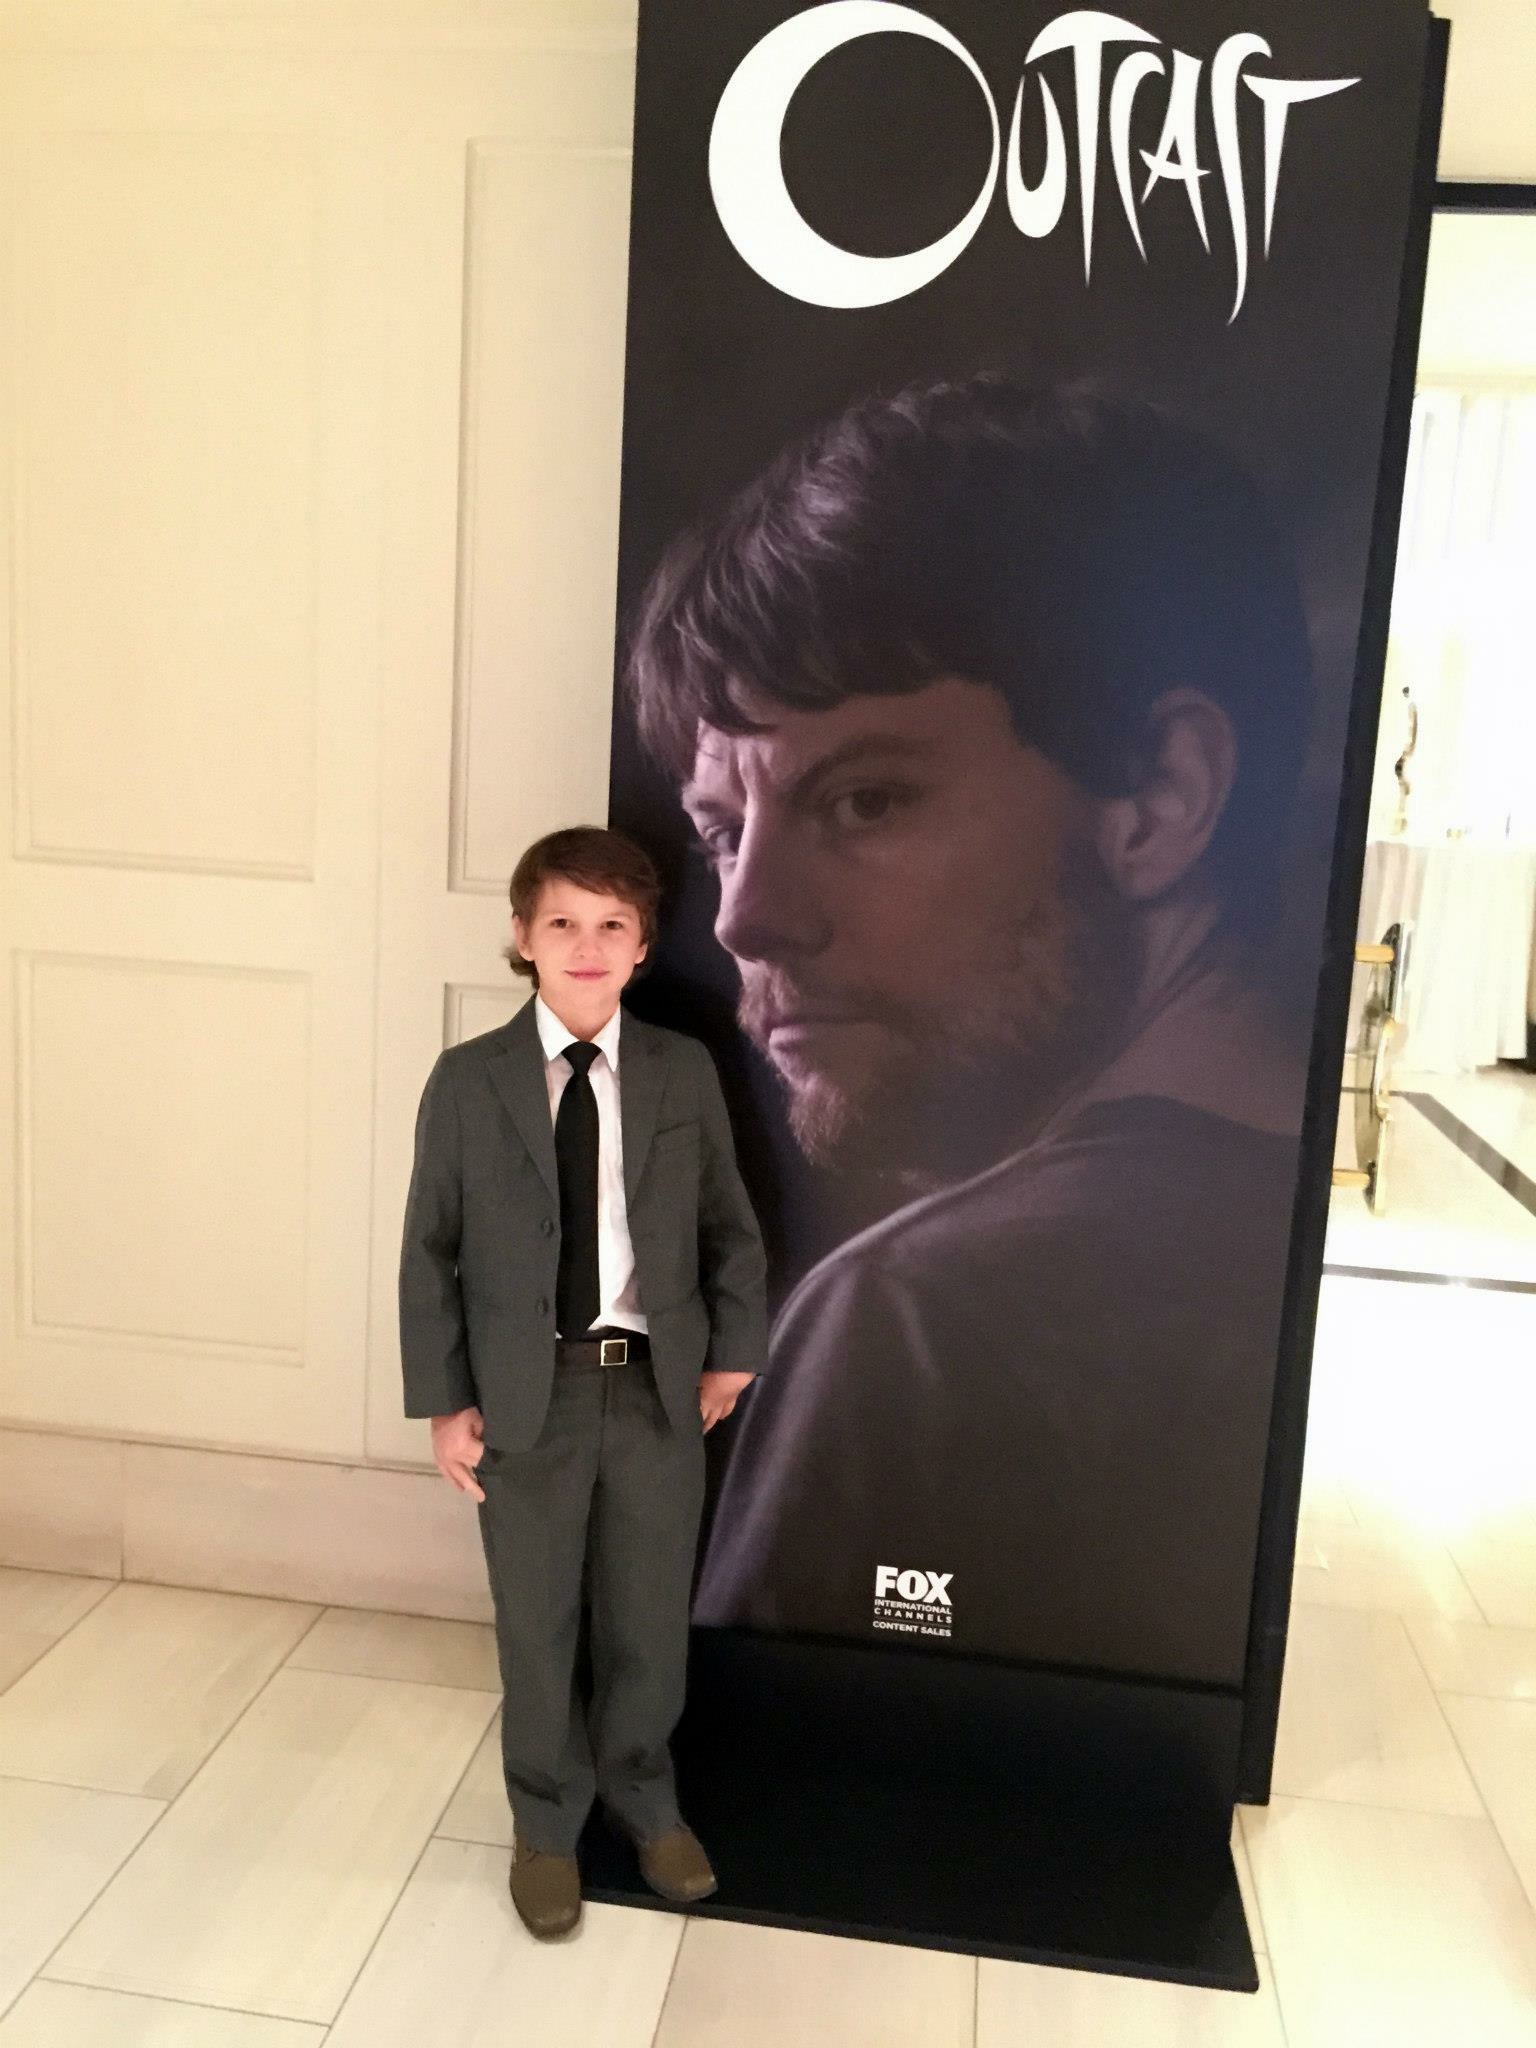 Outcast Screening standing next to his buddy!